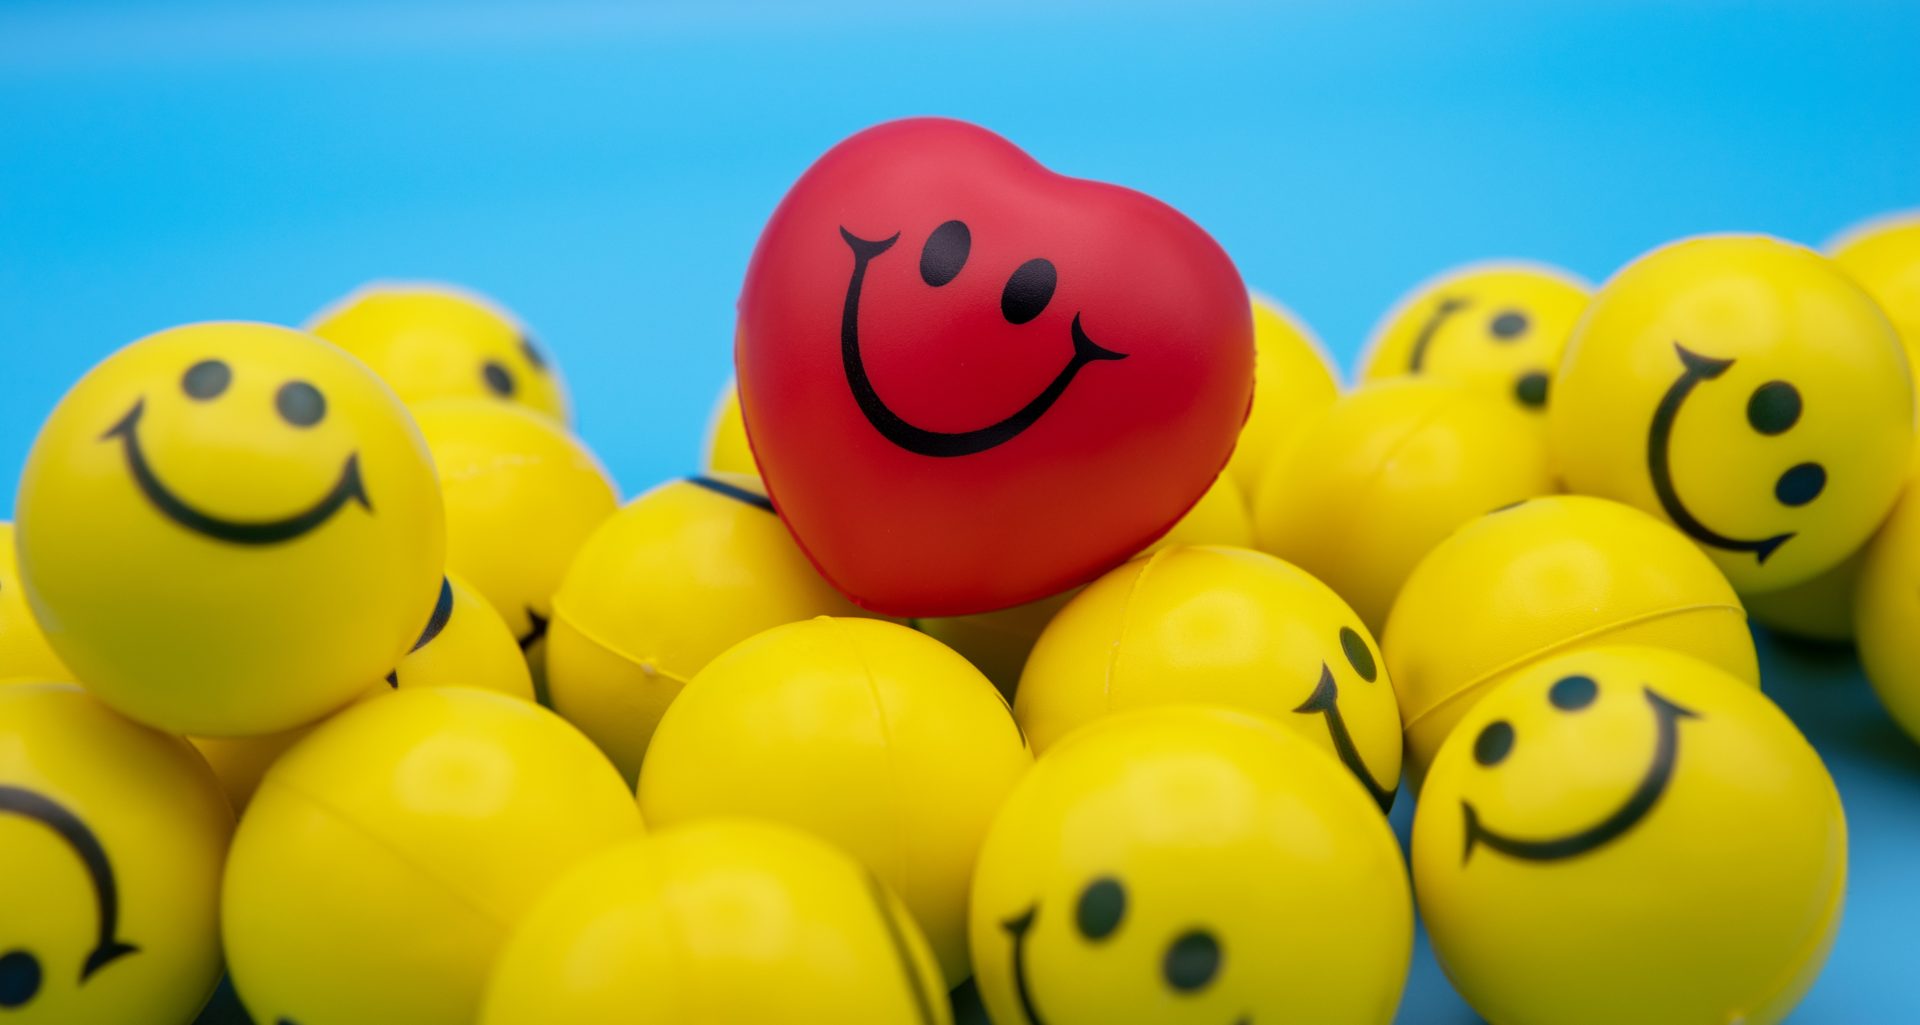 A red smile emoji is present on yellow smile emojies.